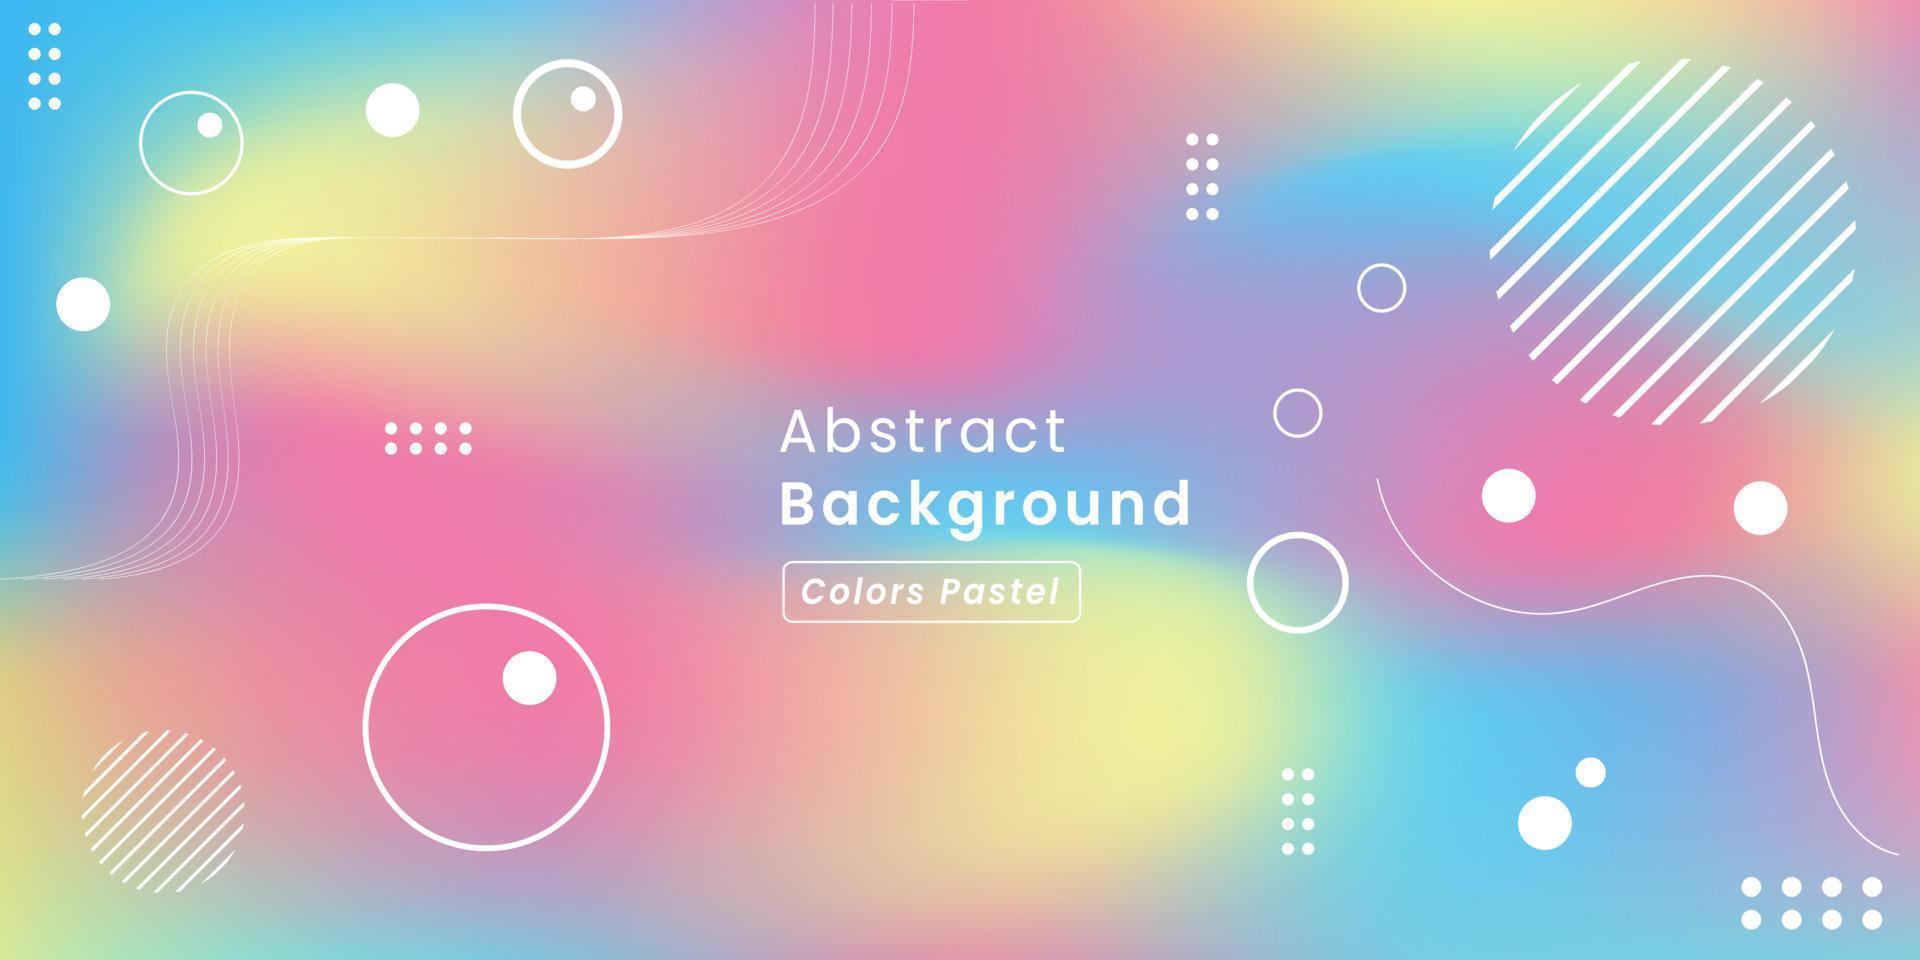 Pastel Color Vector Background with Abstract Geometric Ornament. For Use of Web Pages, Event Banners, Advertising Promotions, Display Wallpapers and More.